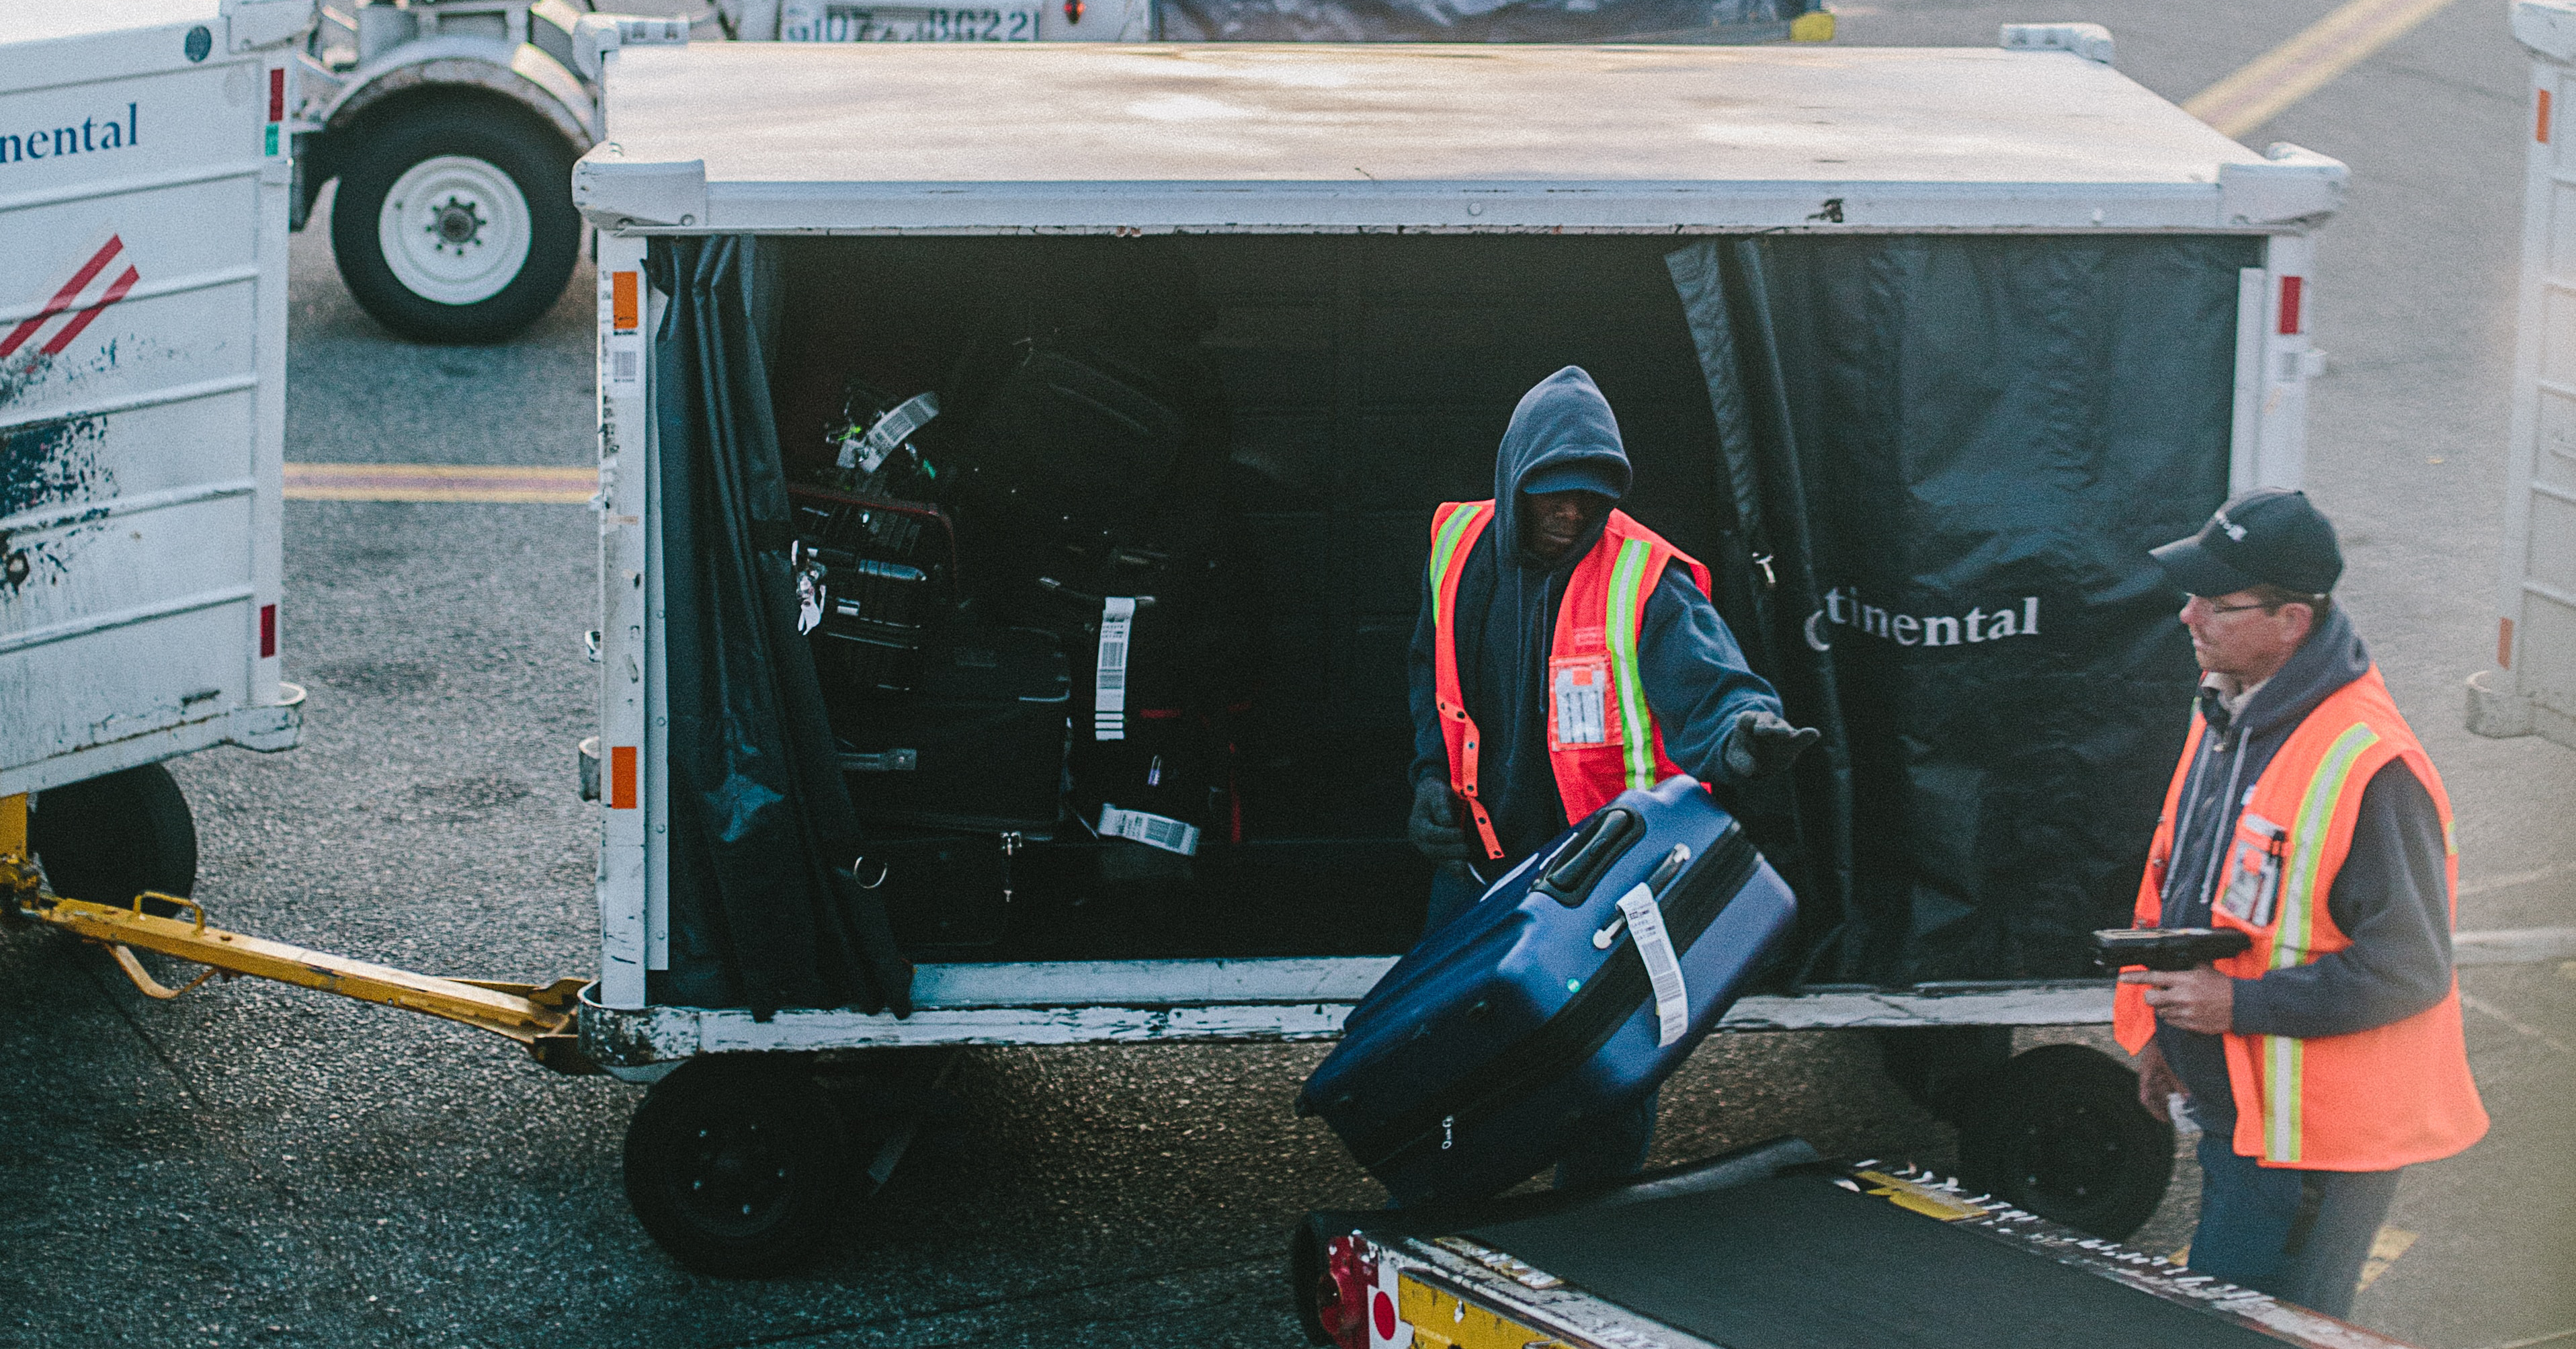 two baggage handlers move bags from a cart to a conveyor belt